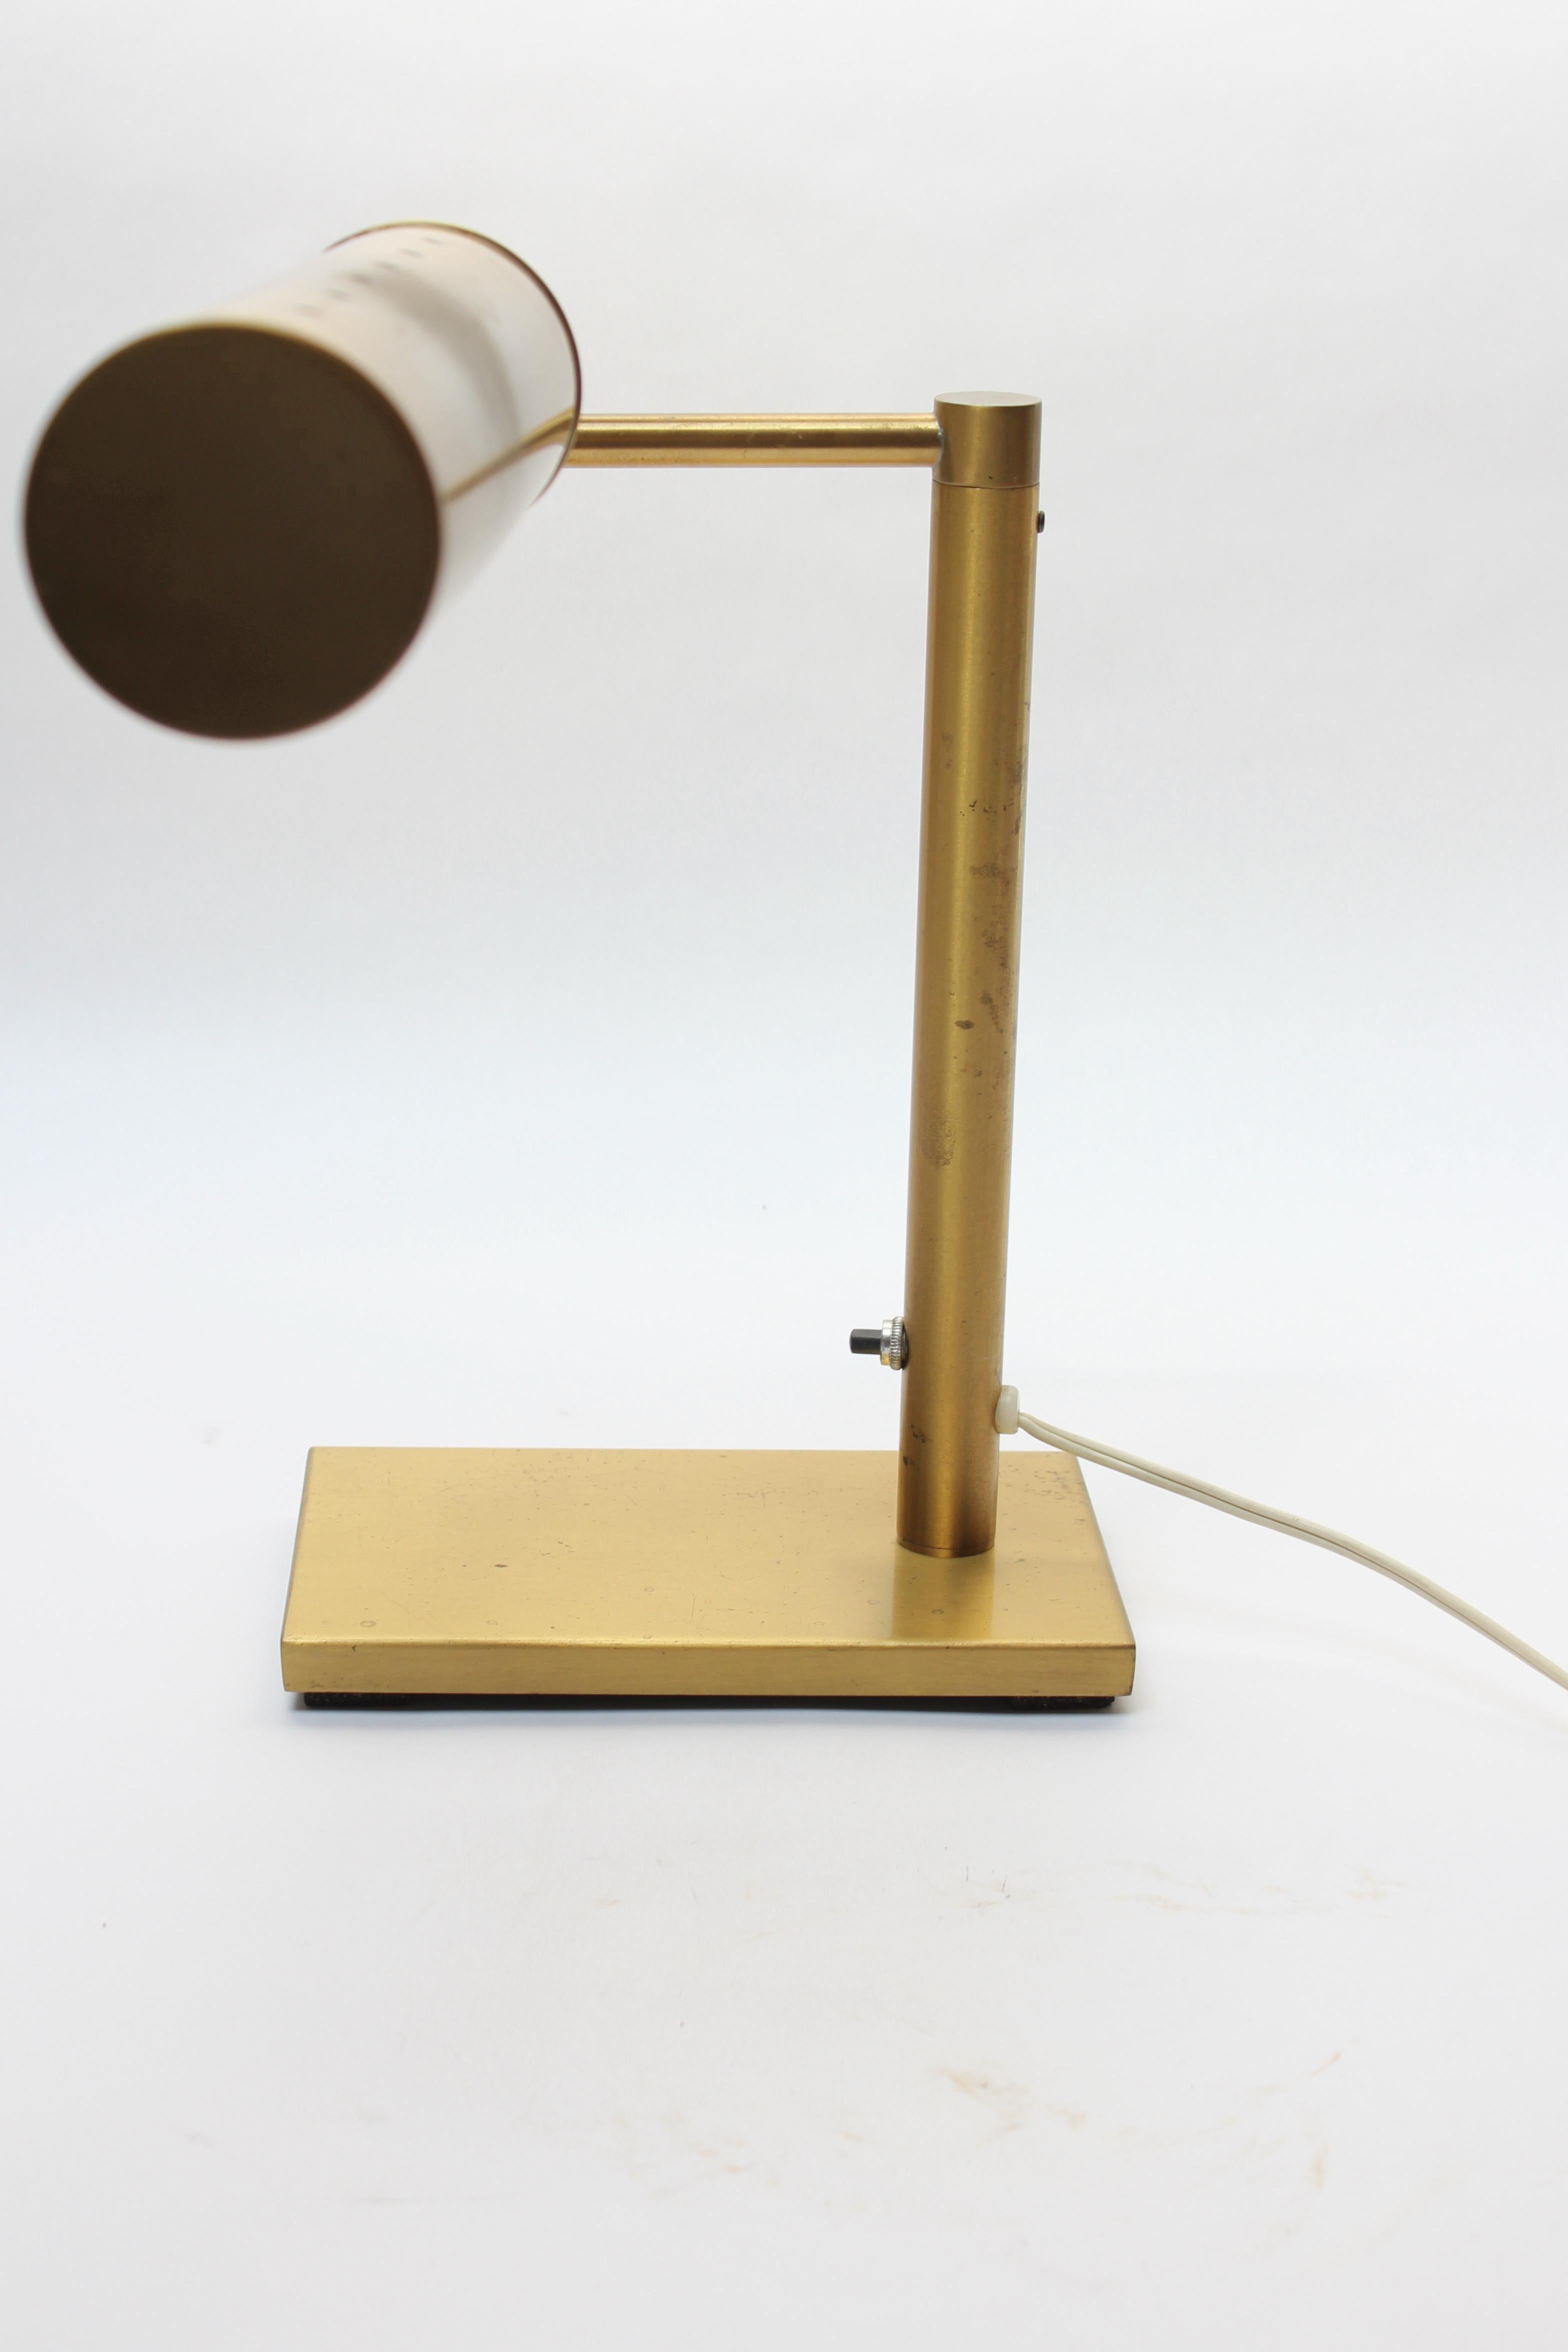 Walter Von Nessen Brass Swing Arm Table Lamp with Adjustable Cylindrical Shade For Sale 2